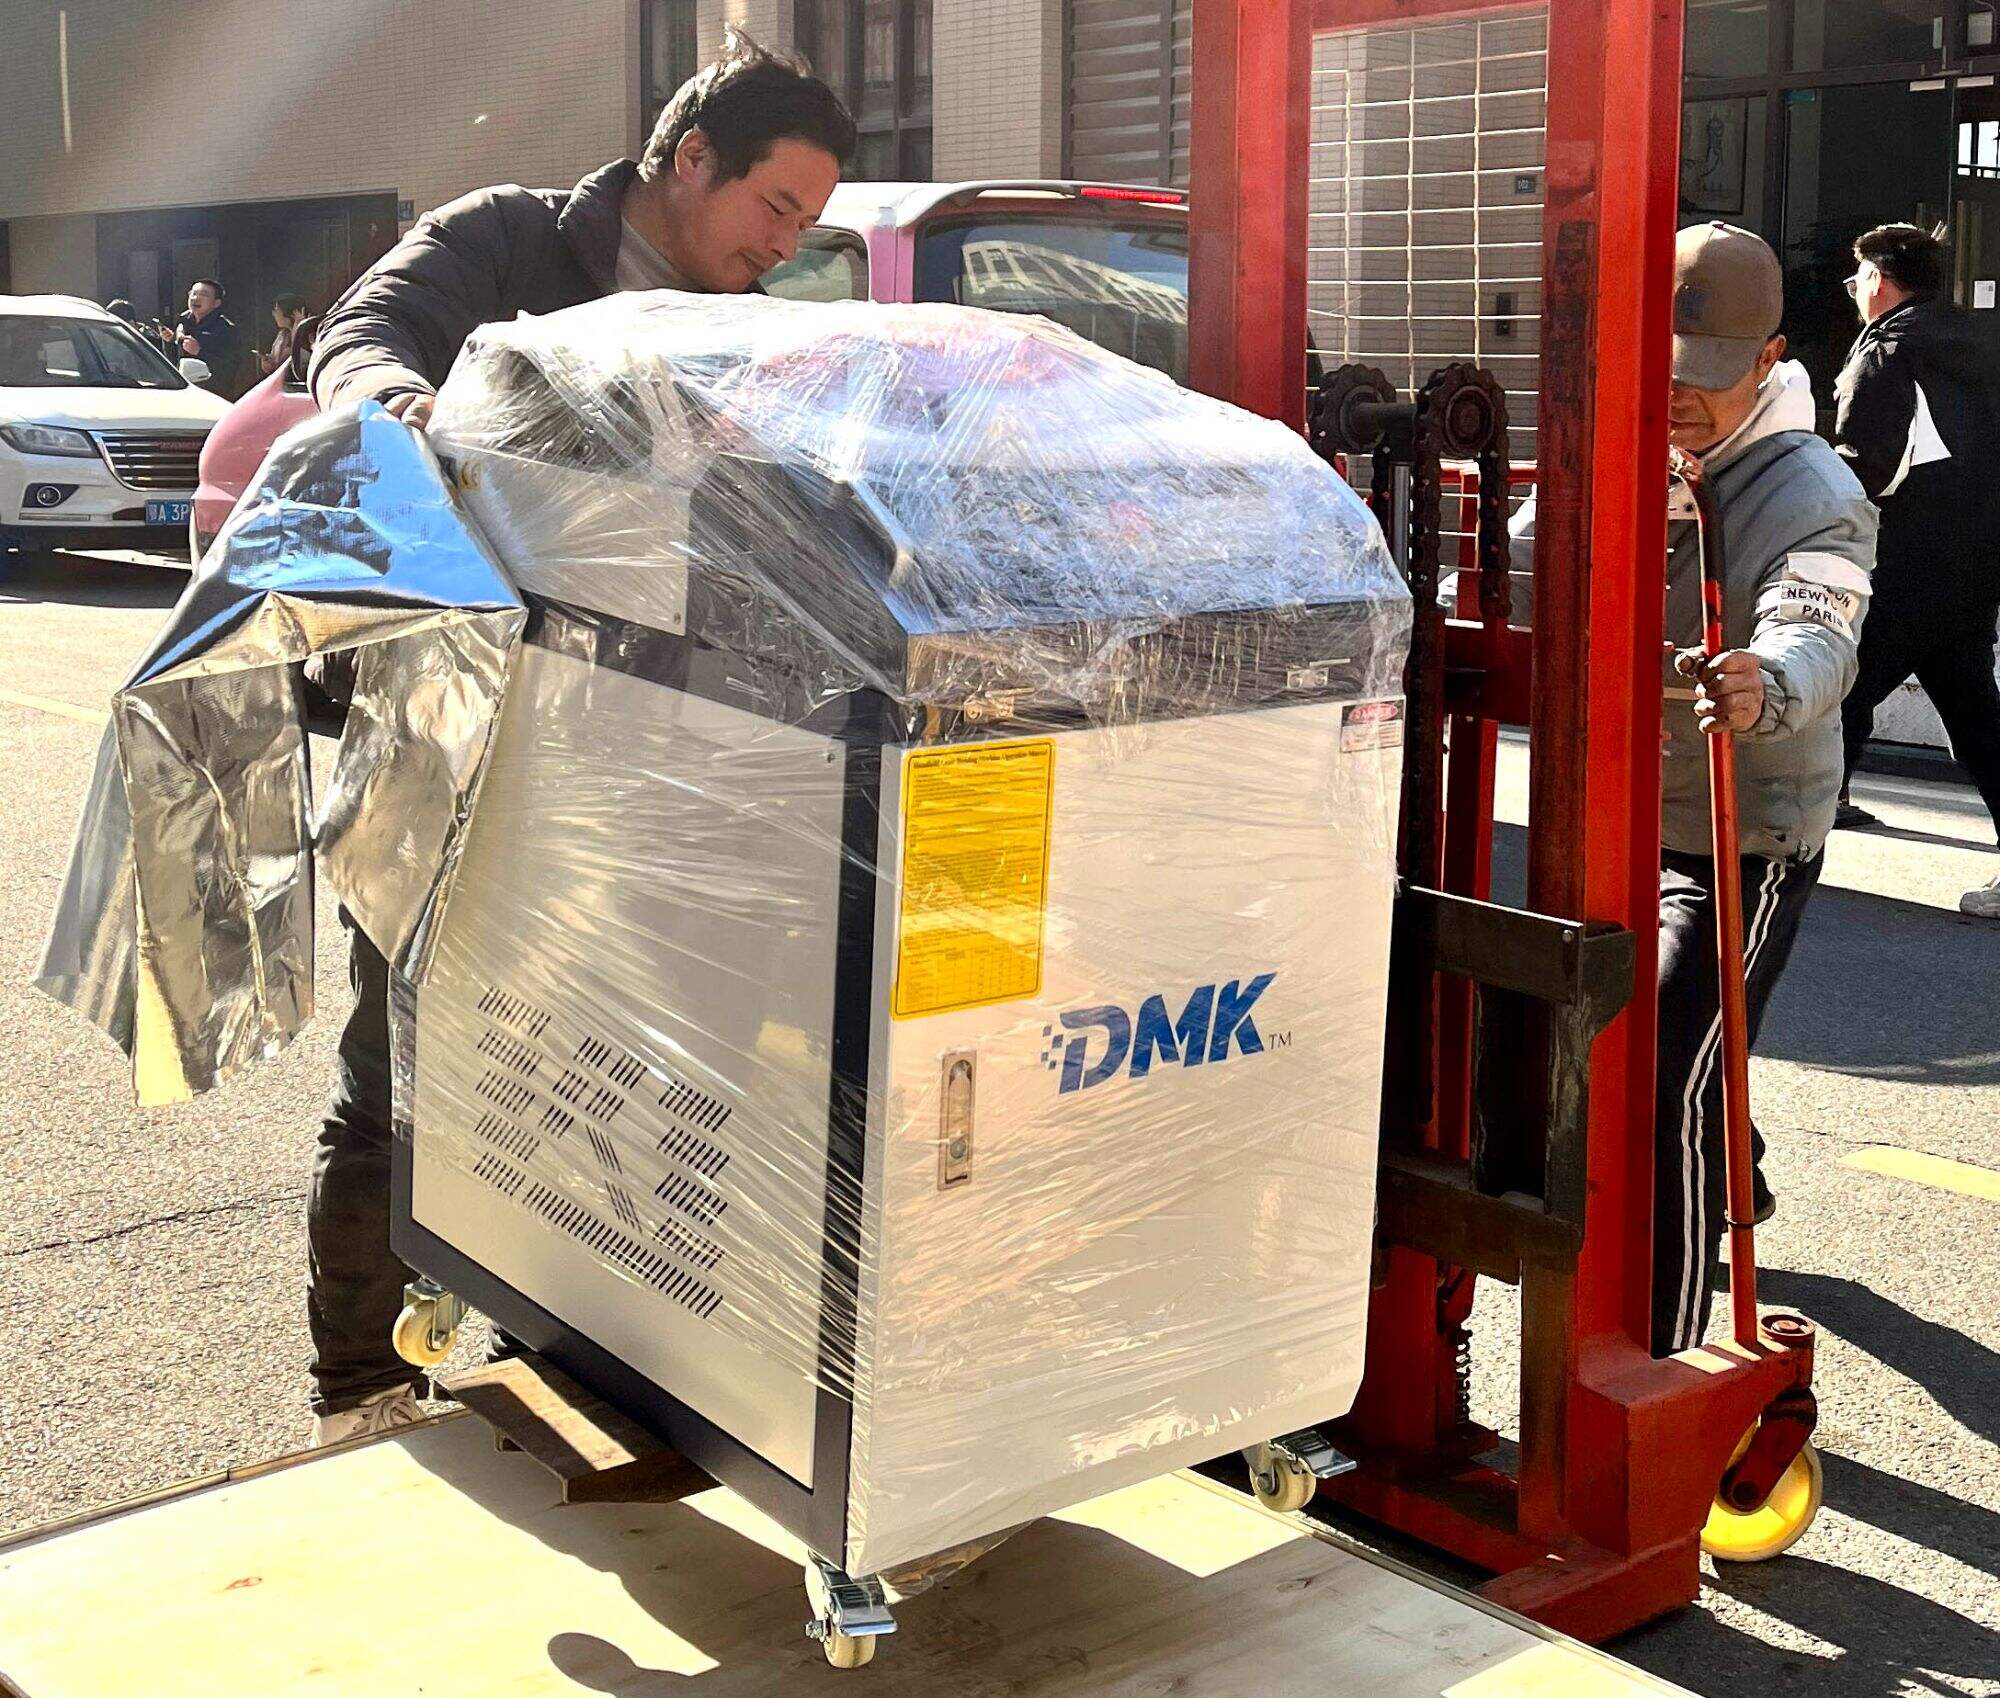 DMK laser welding machines are shipping to Europe